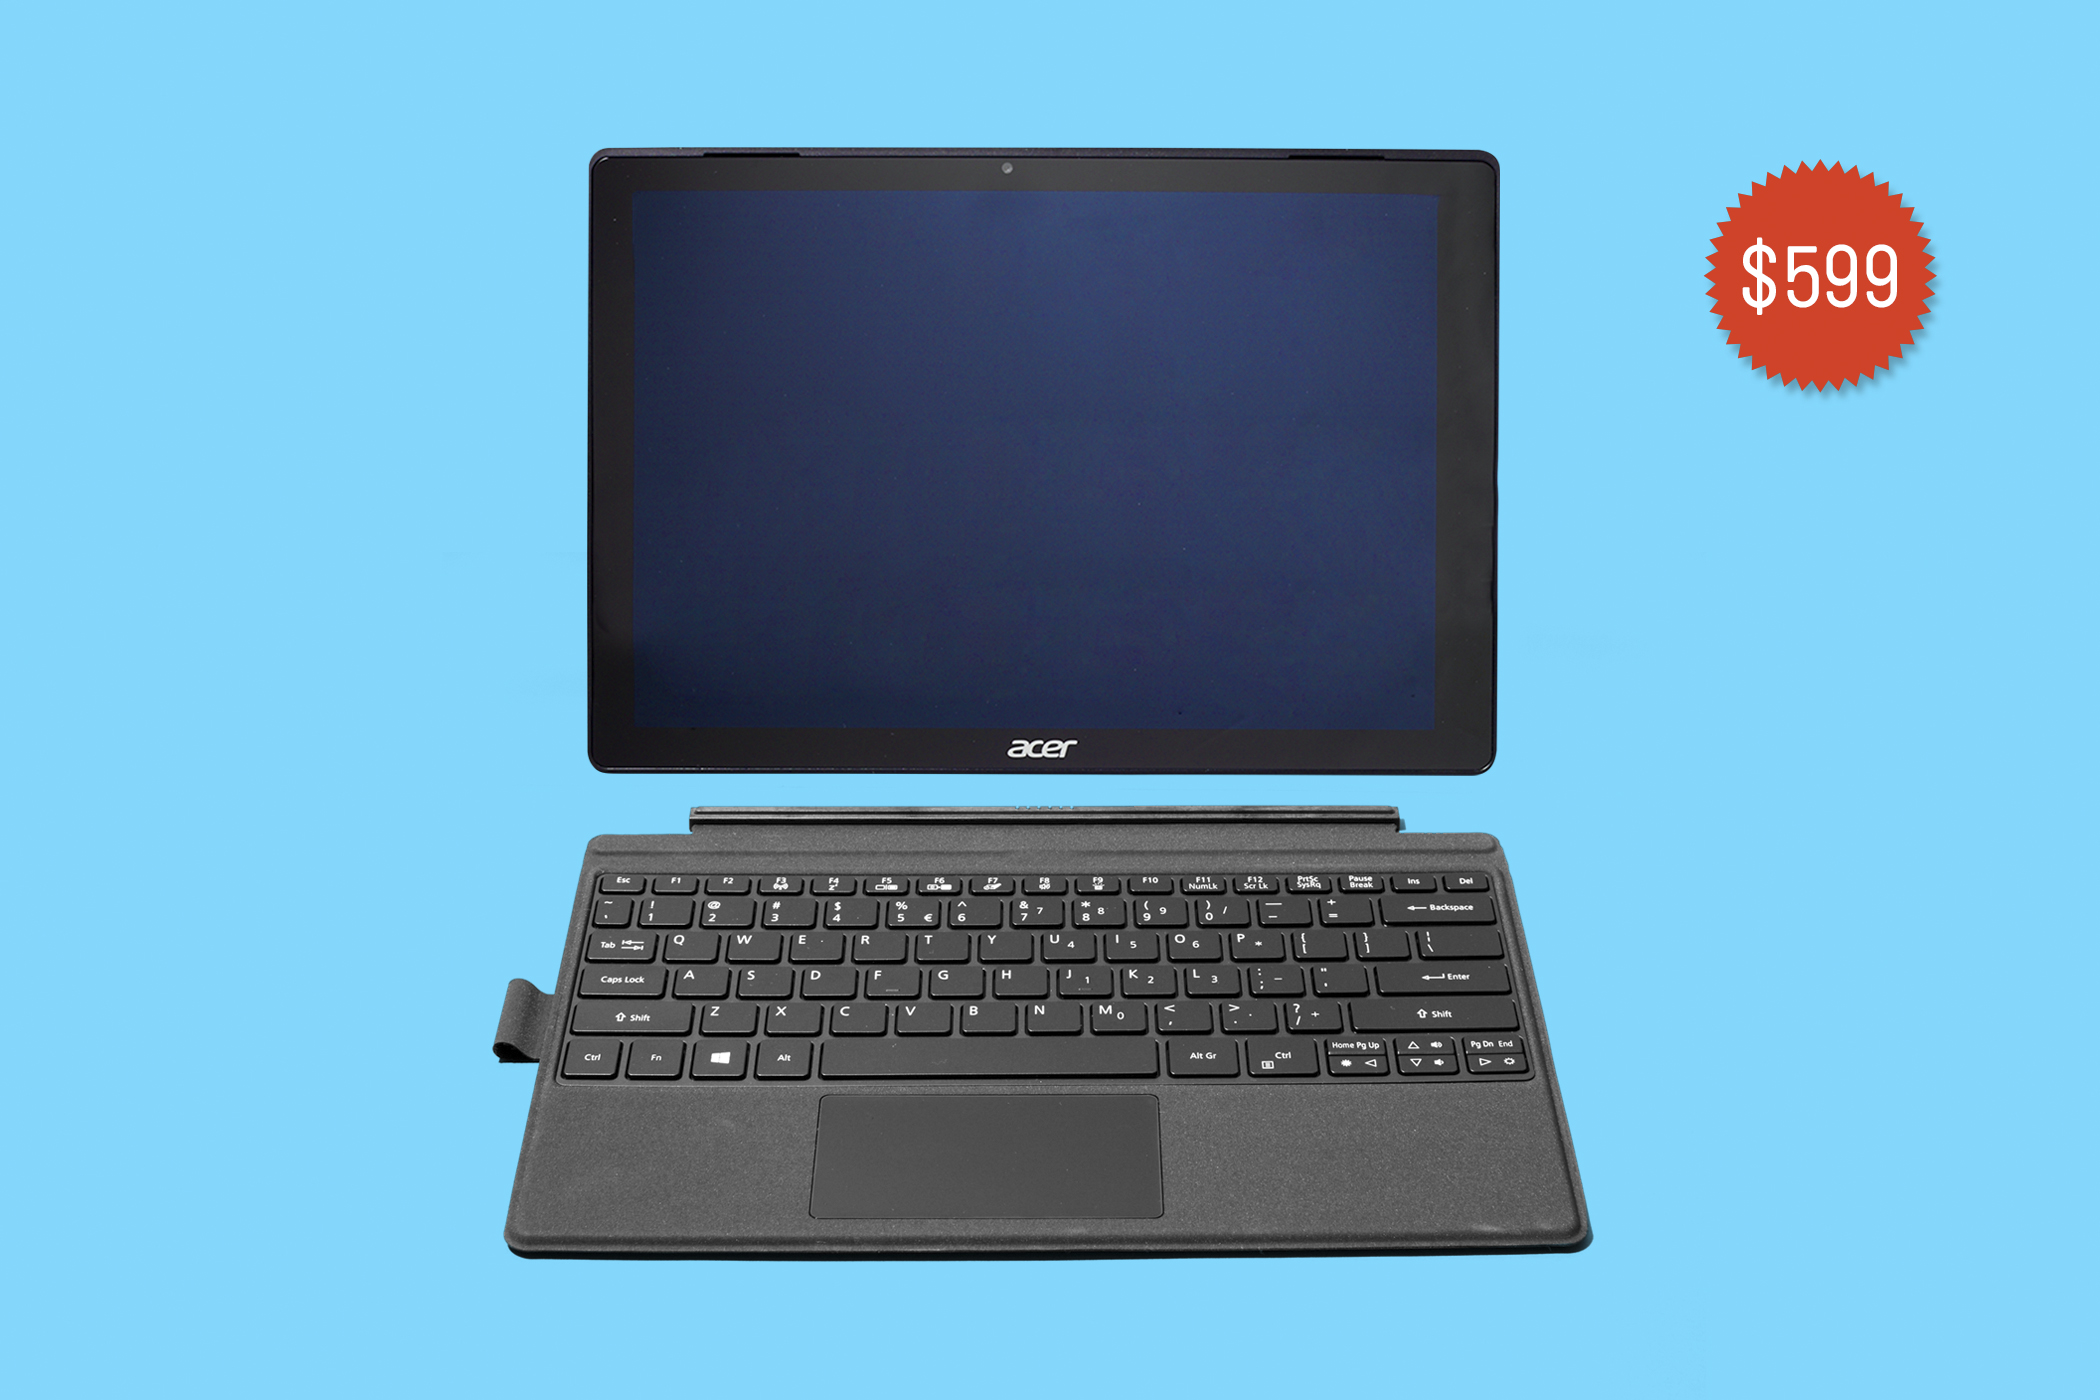 3 Great Laptops for Back-to-School